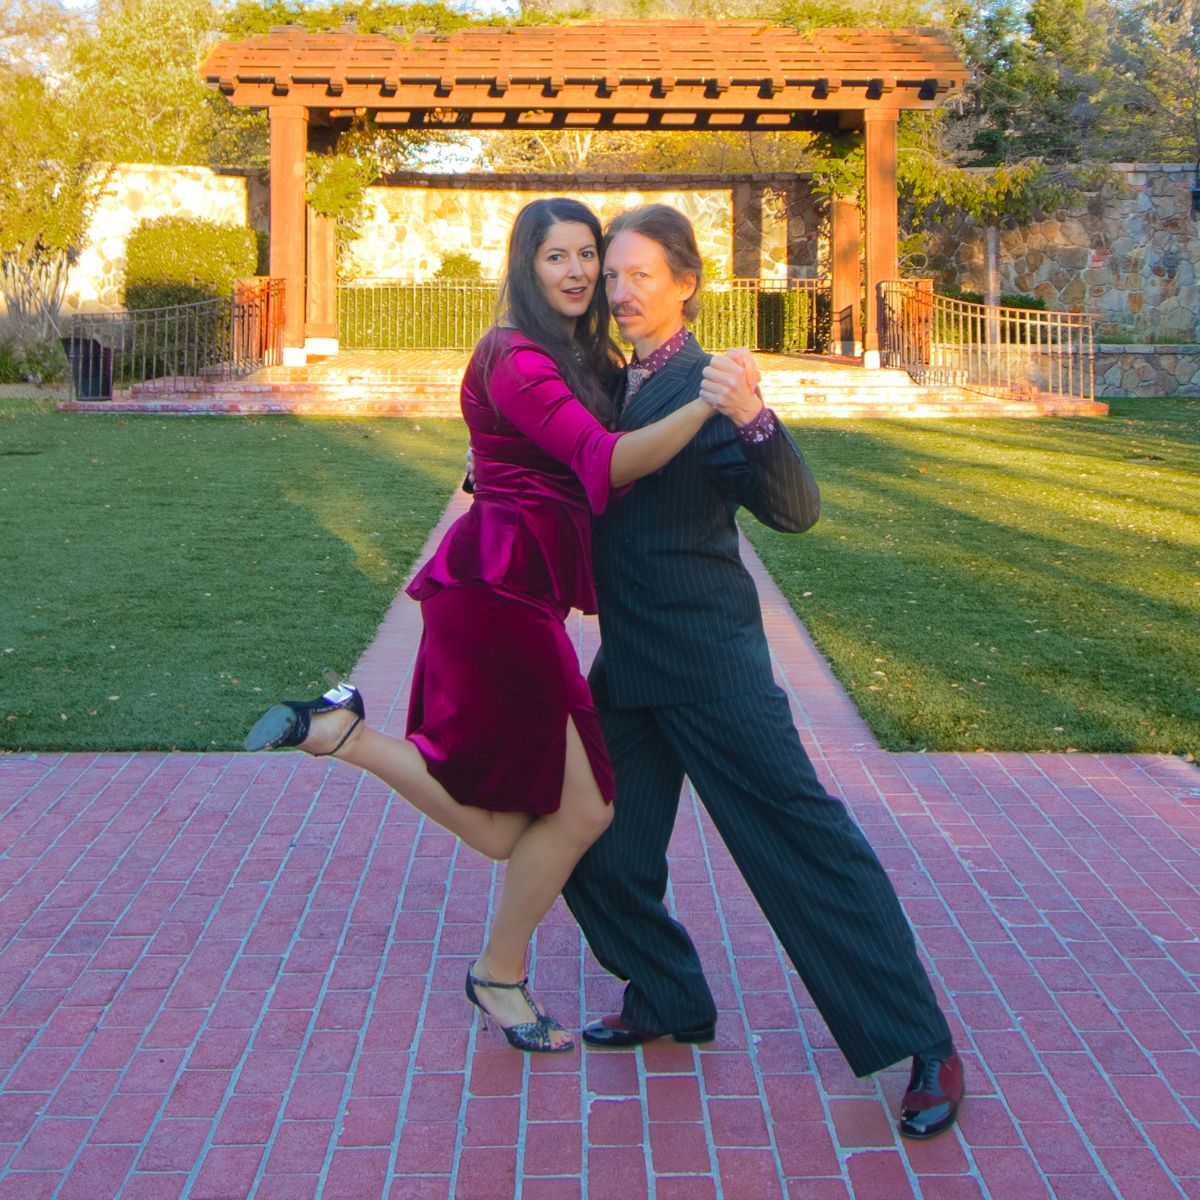 Argentine Tango dancing by Marcelo Solis and Mimi at Yountville, California